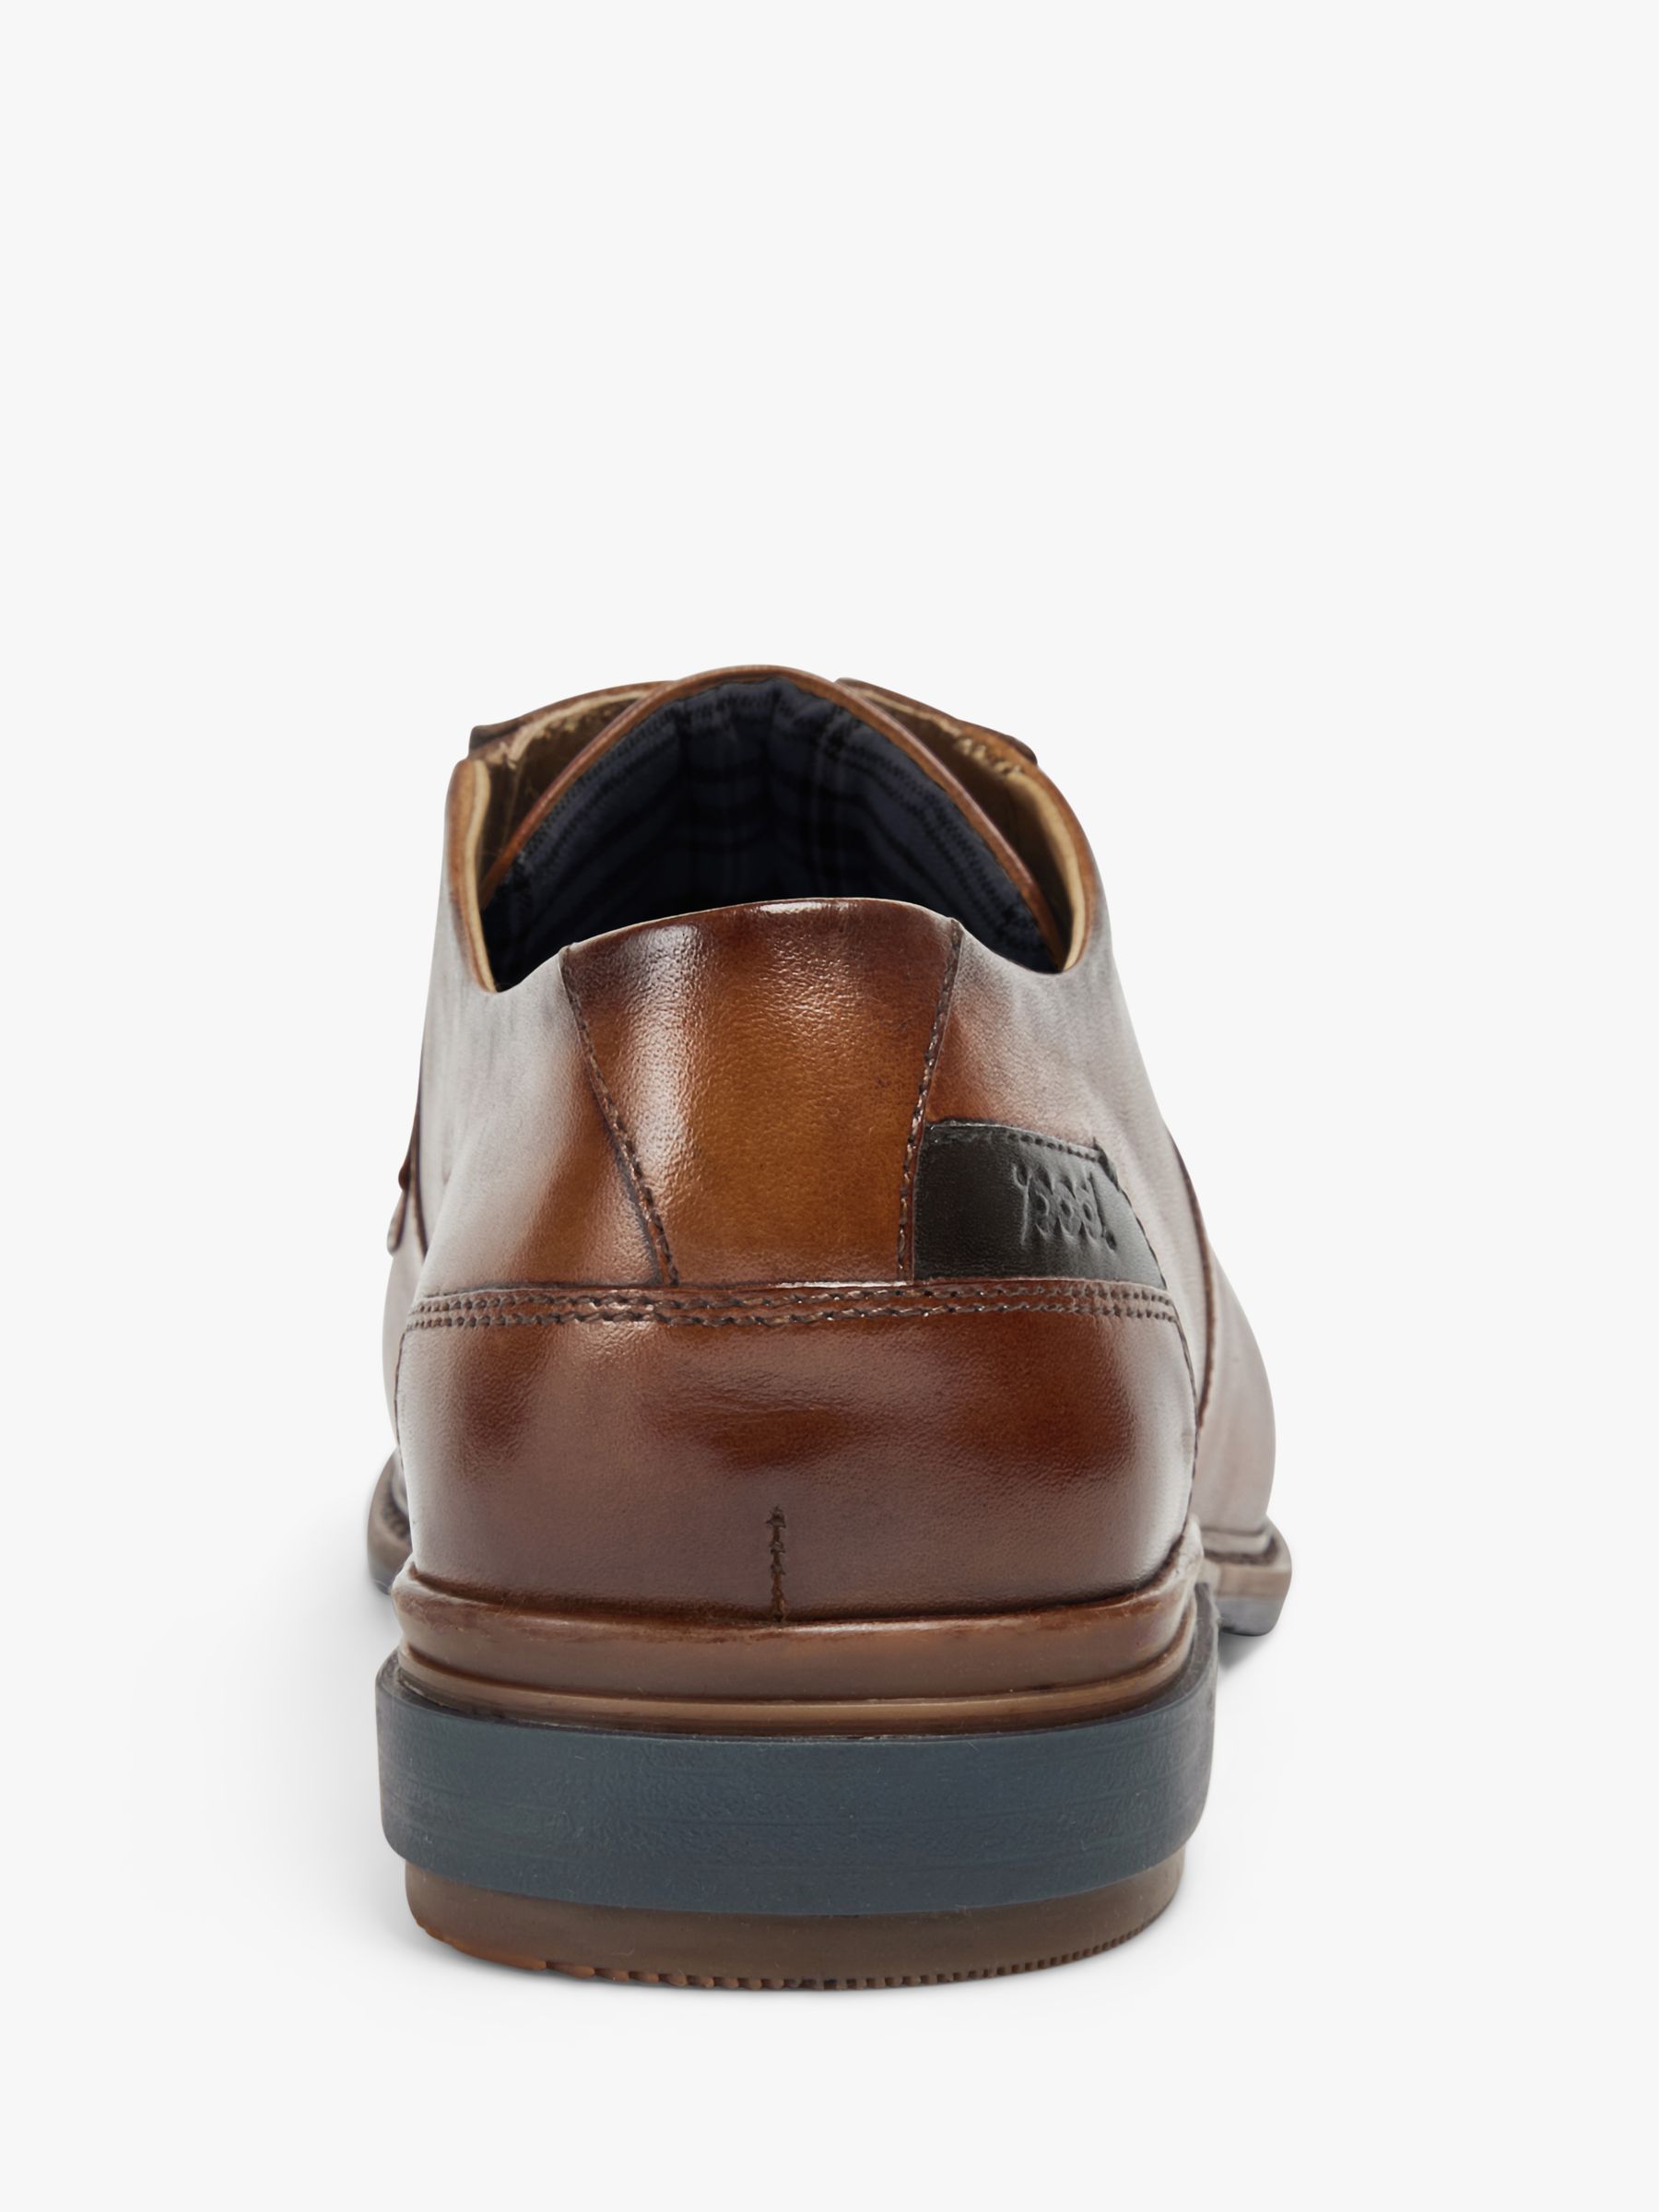 Buy Pod Savage Smart Lace Up Leather Shoes Online at johnlewis.com